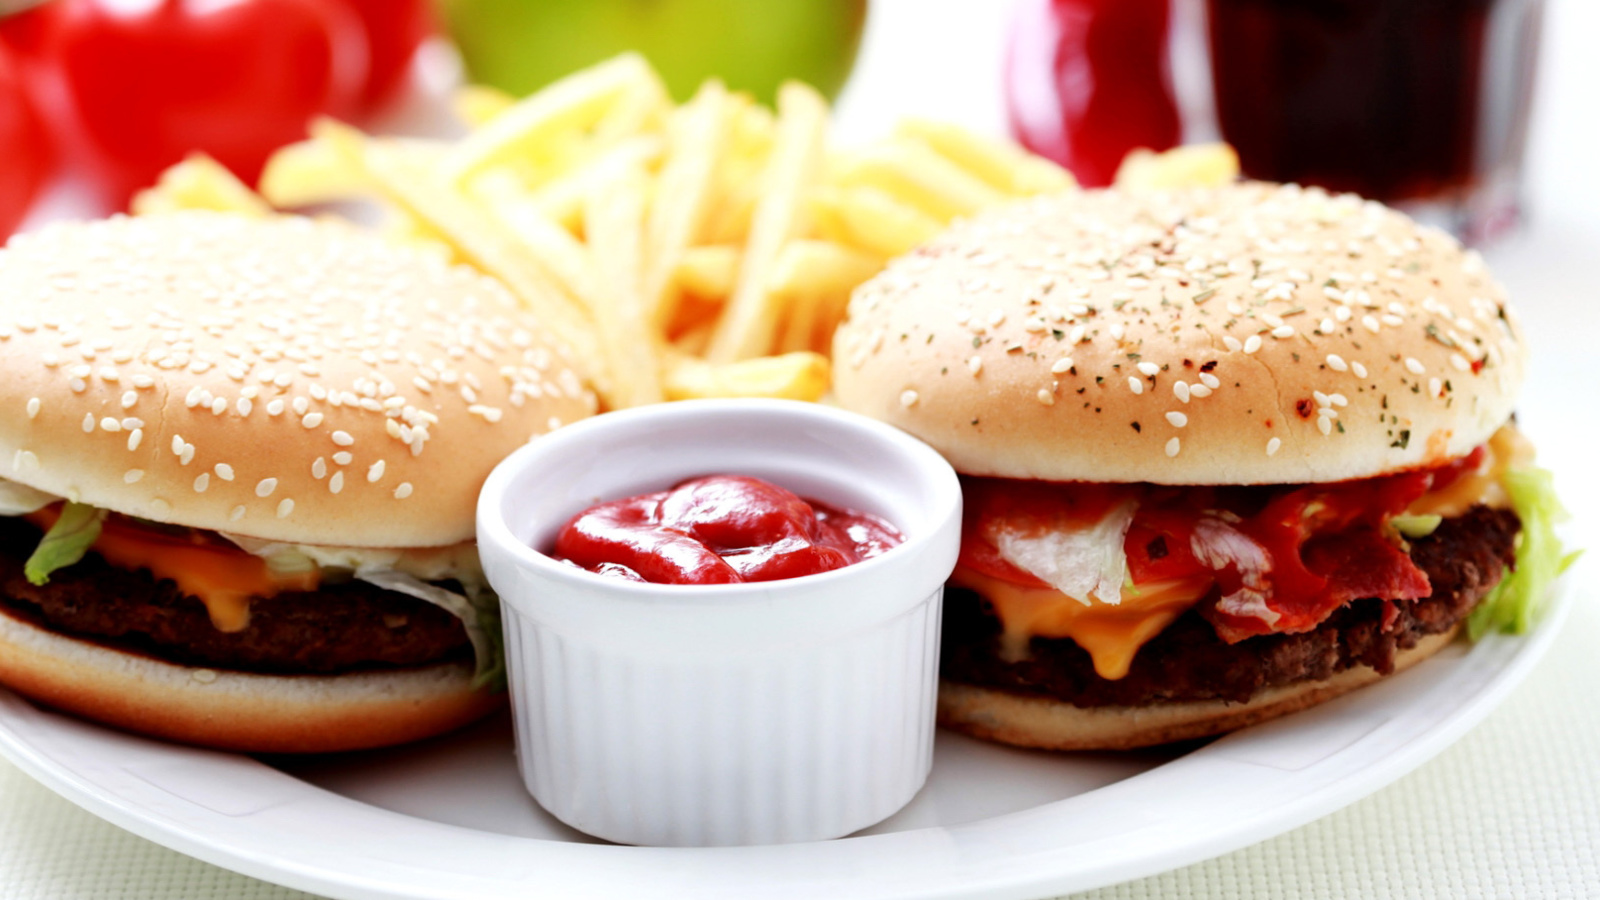 Burgers with Barbecue sauce wallpaper 1600x900